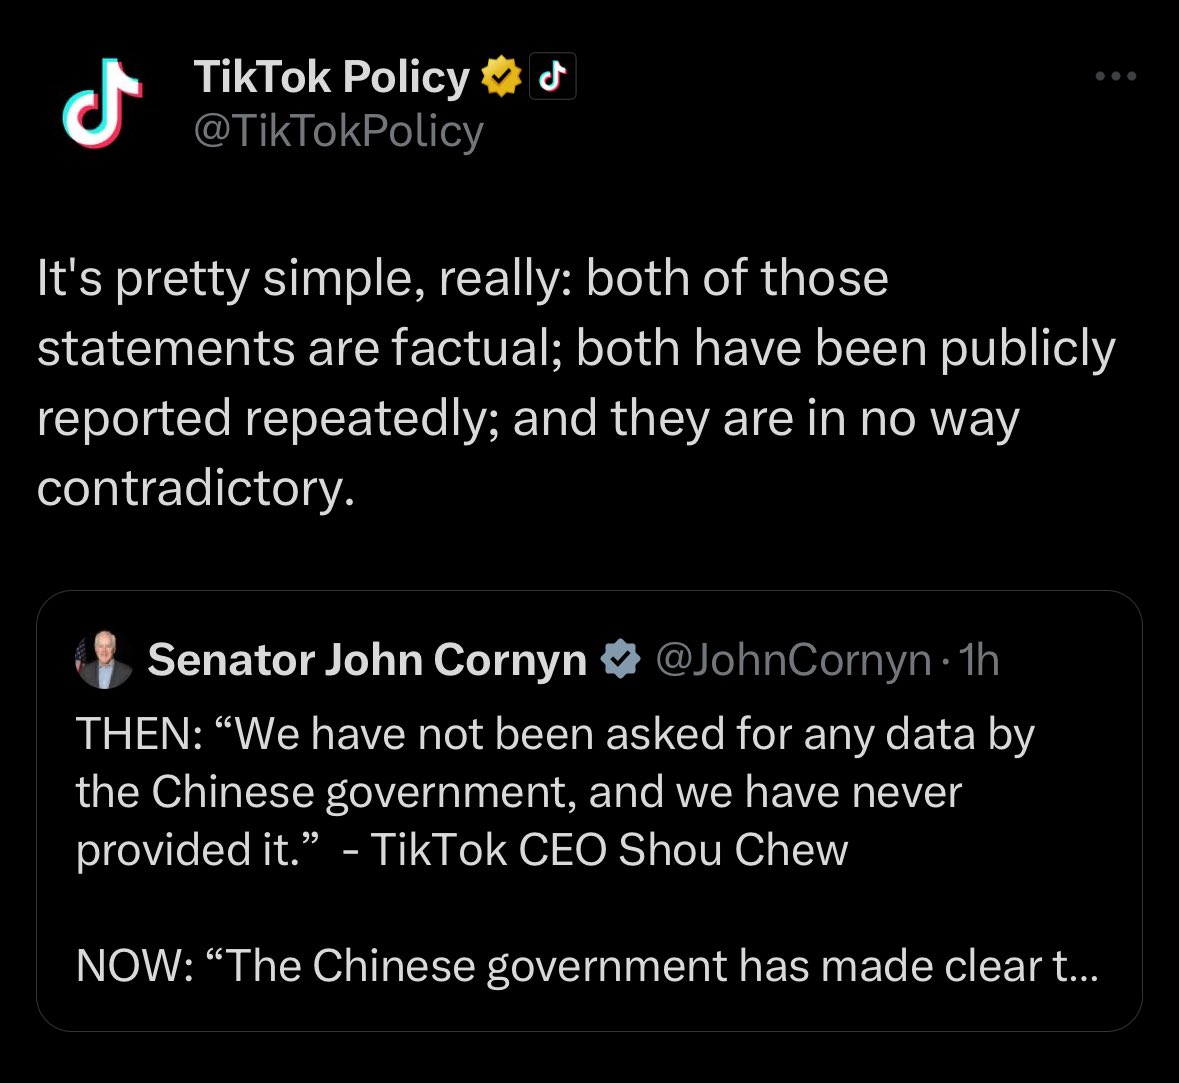 TikTok again using their policy acct to clap back at lawmakers: